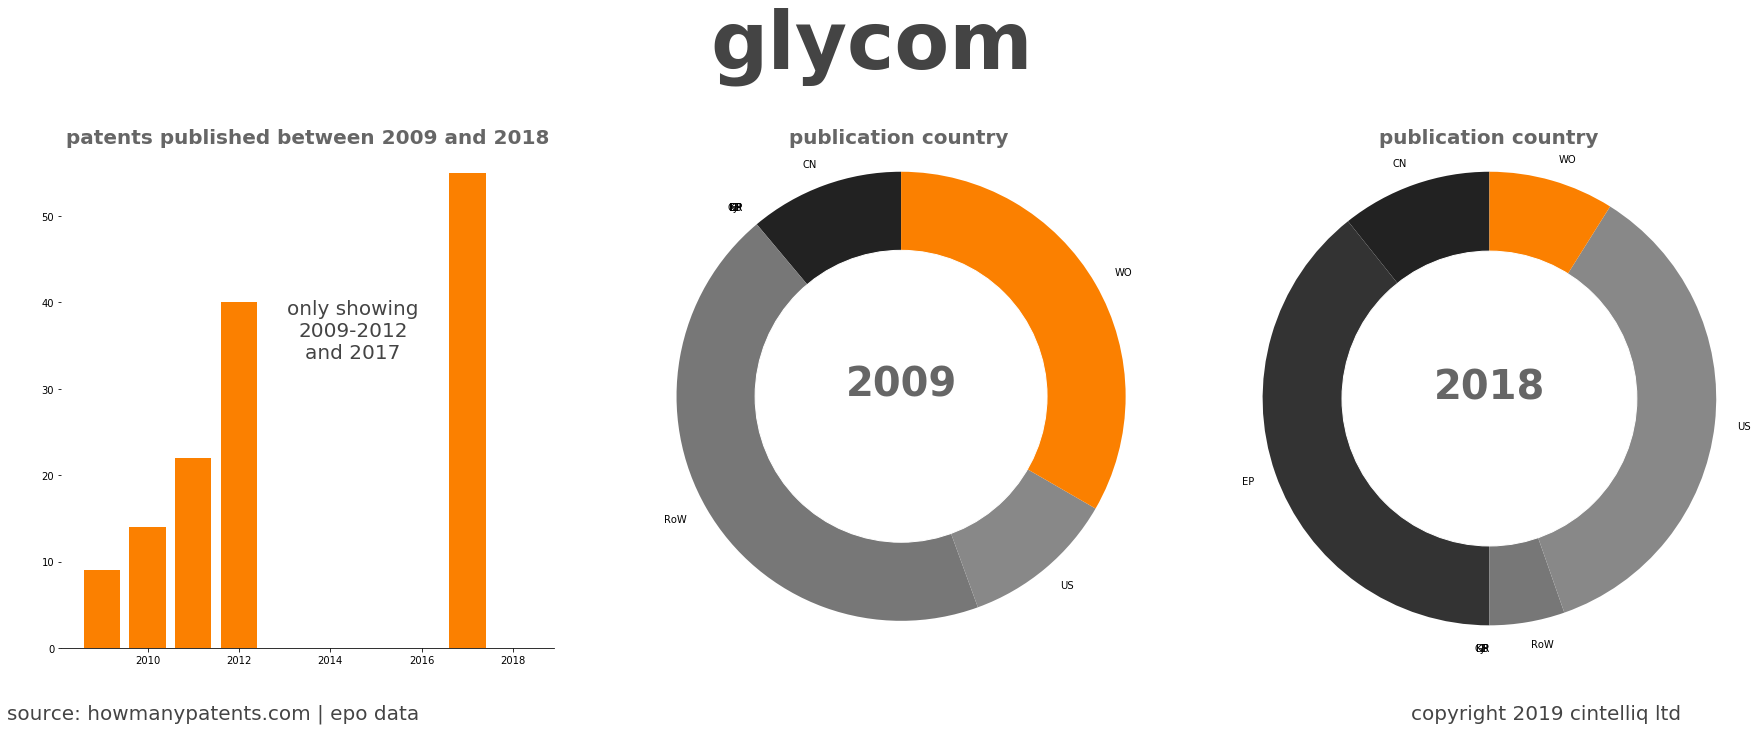 summary of patents for Glycom